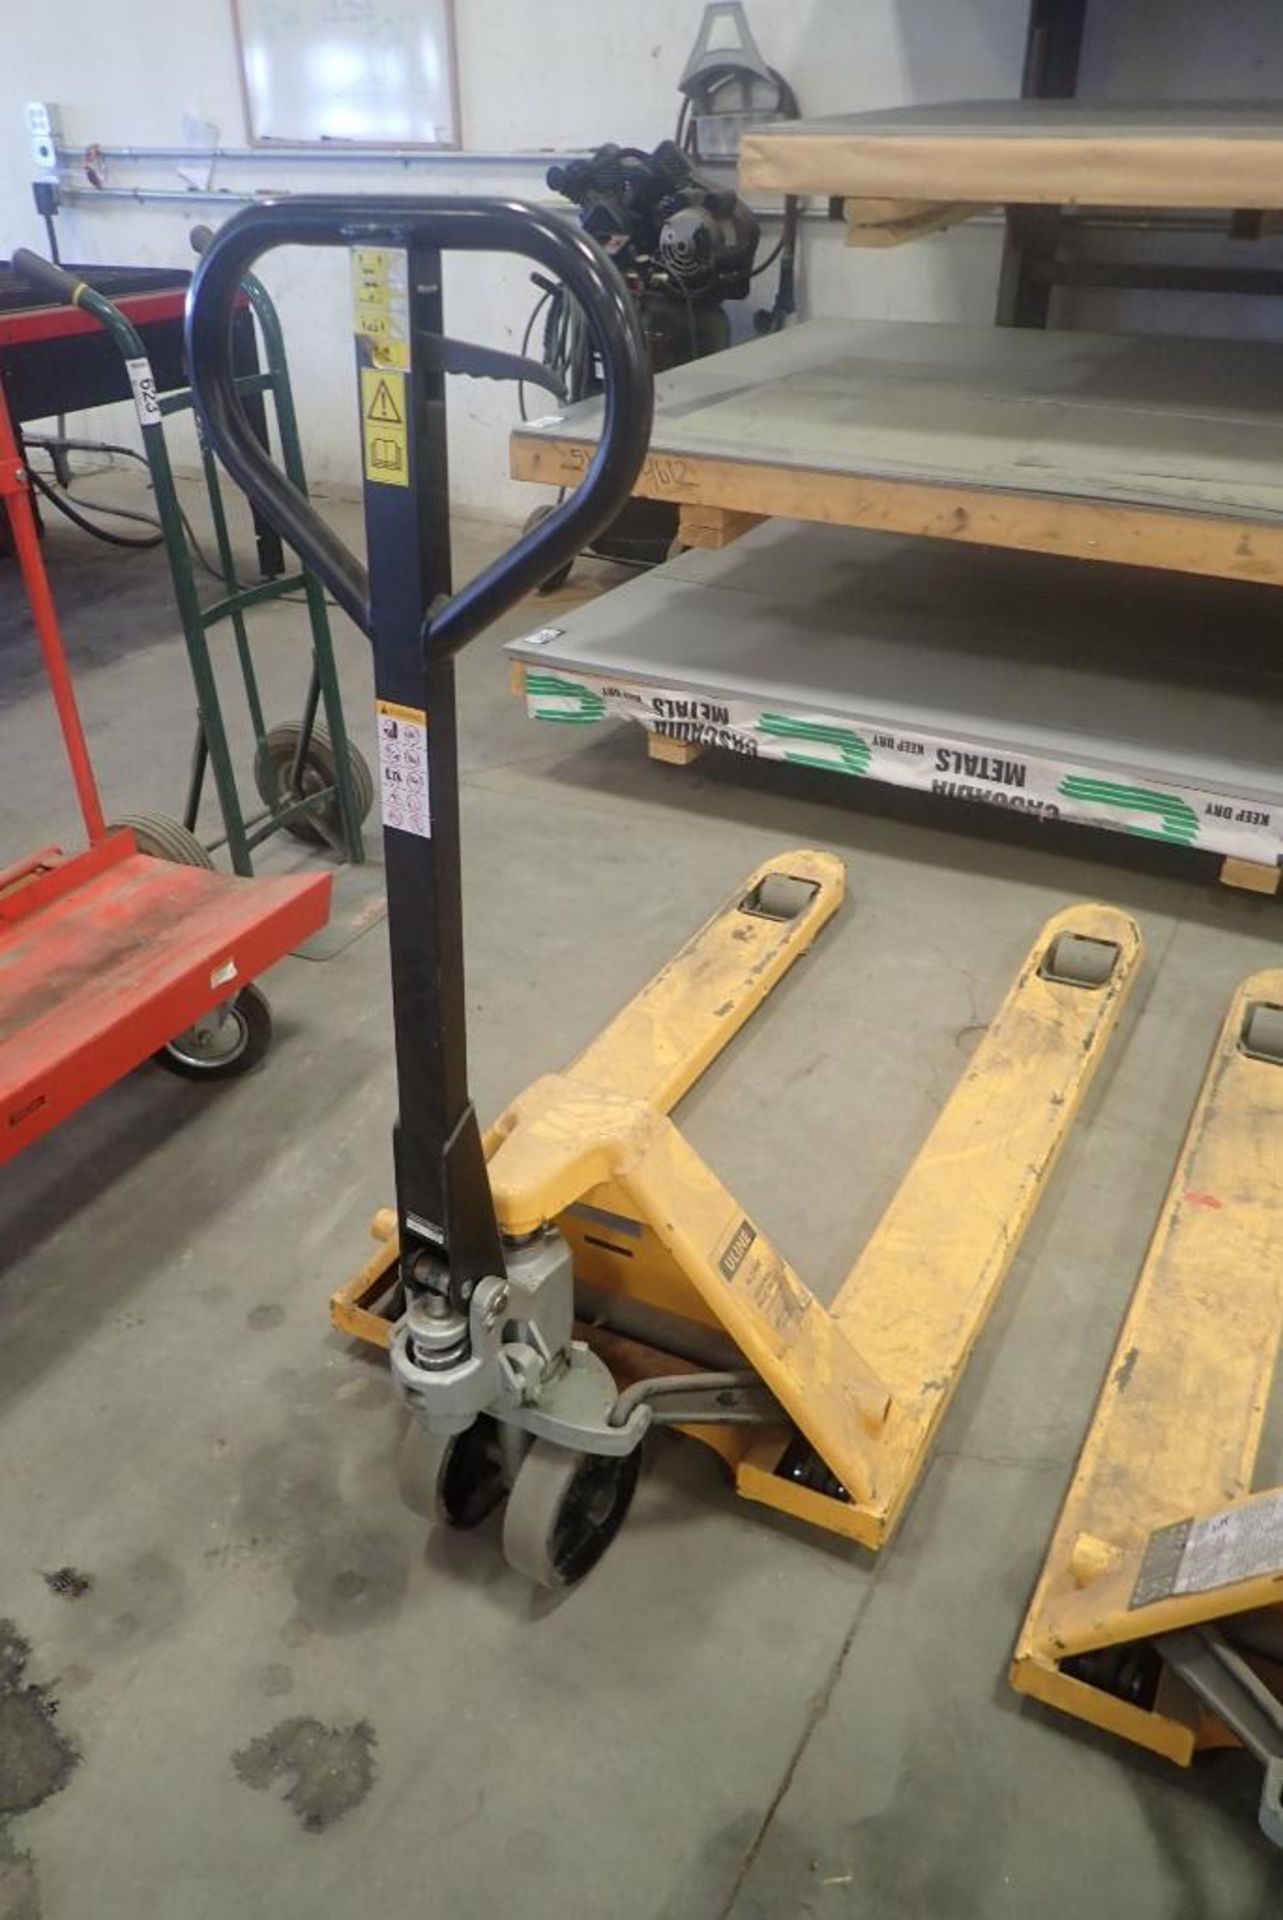 5,500lbs Capacity Pallet Jack-BEING USED FOR LOADOUT-CANNOT BE REMOVED UNTIL APR. 18/23 @ 12PM.